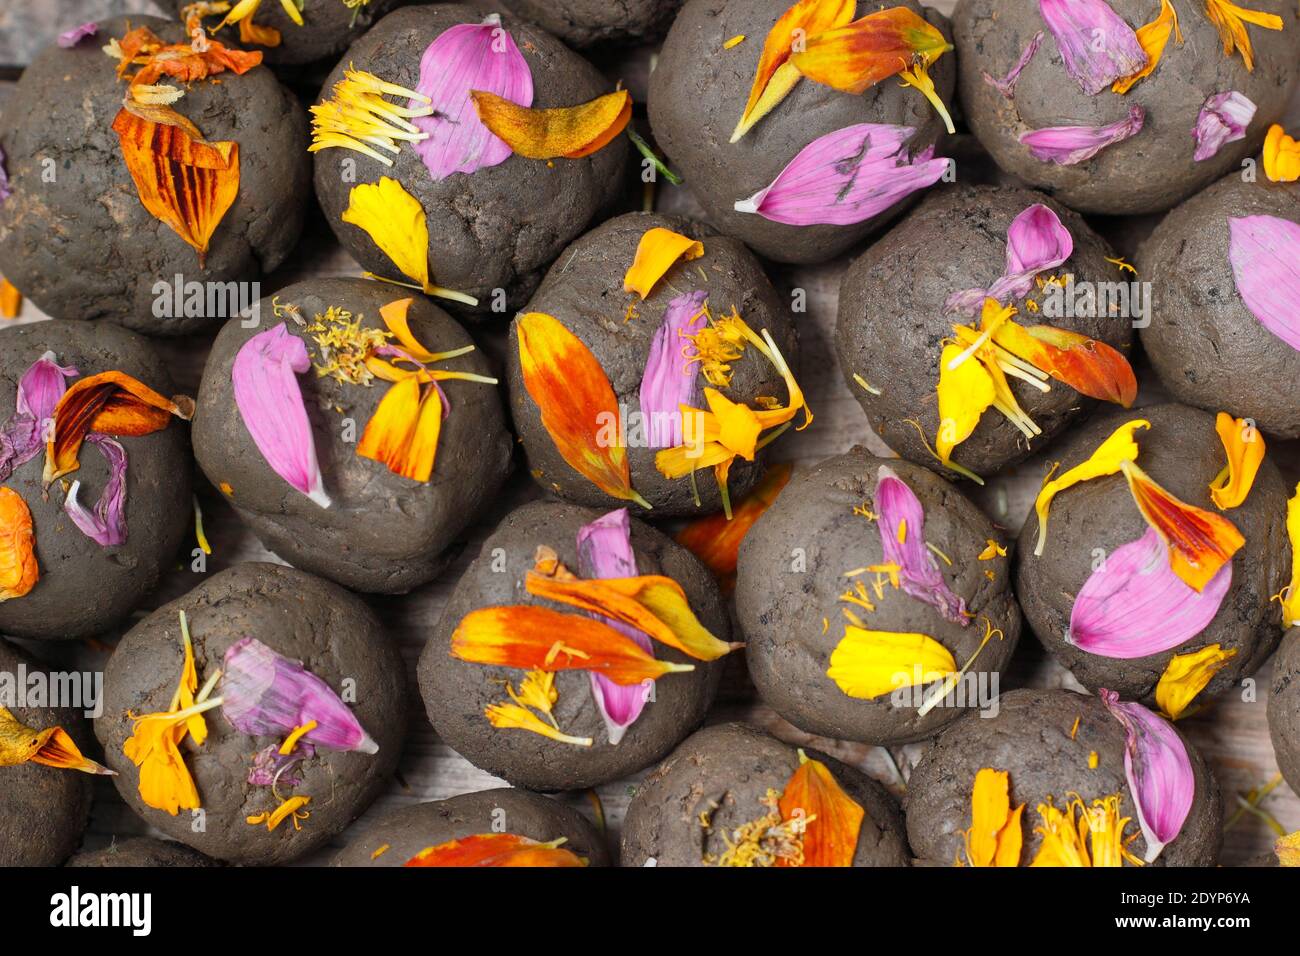 Home made flower bombs, or seed balls, made with clay soil embedded with various flower seeds and embellished with petals. UK Stock Photo